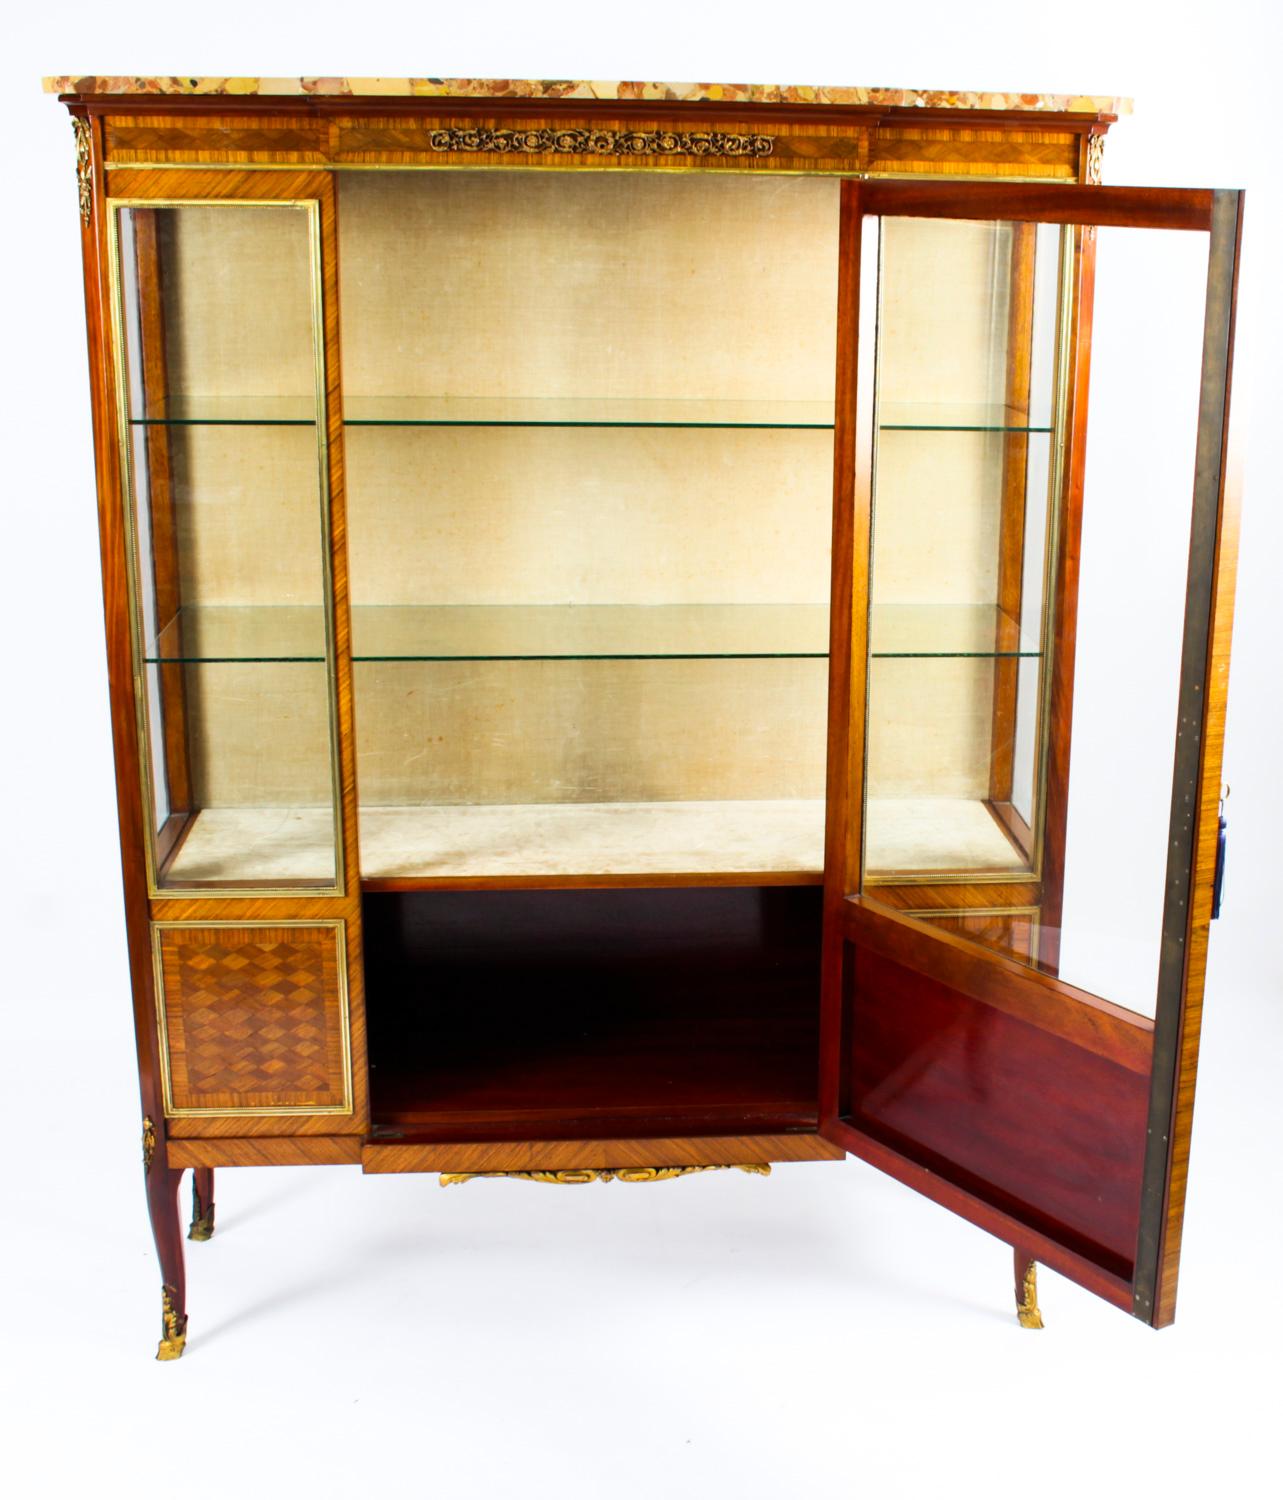 Antique French Parquetry Ormolu Mounted Vitrine Cabinet 19th C For Sale 8